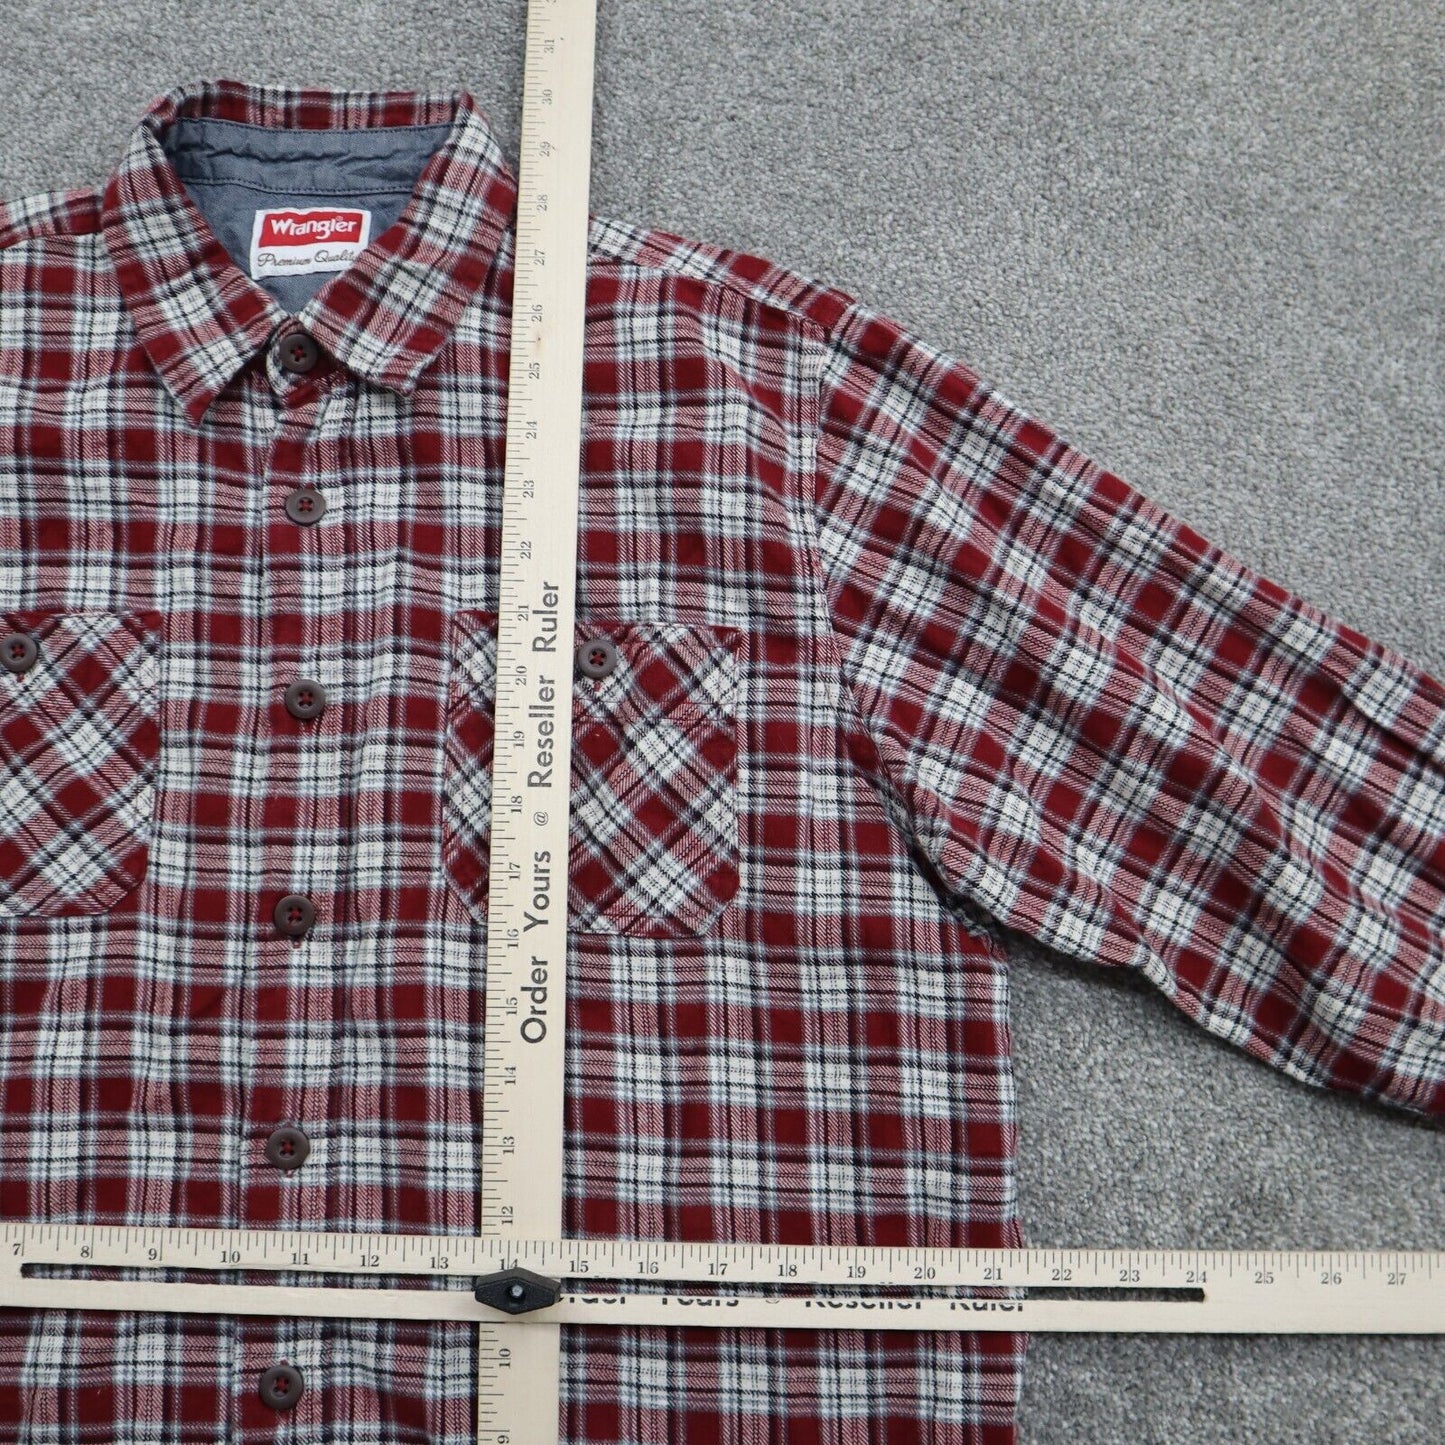 Wrangler Men Button Up Plaid Shirt 100%Cotton Long Sleeve Red White Size Large